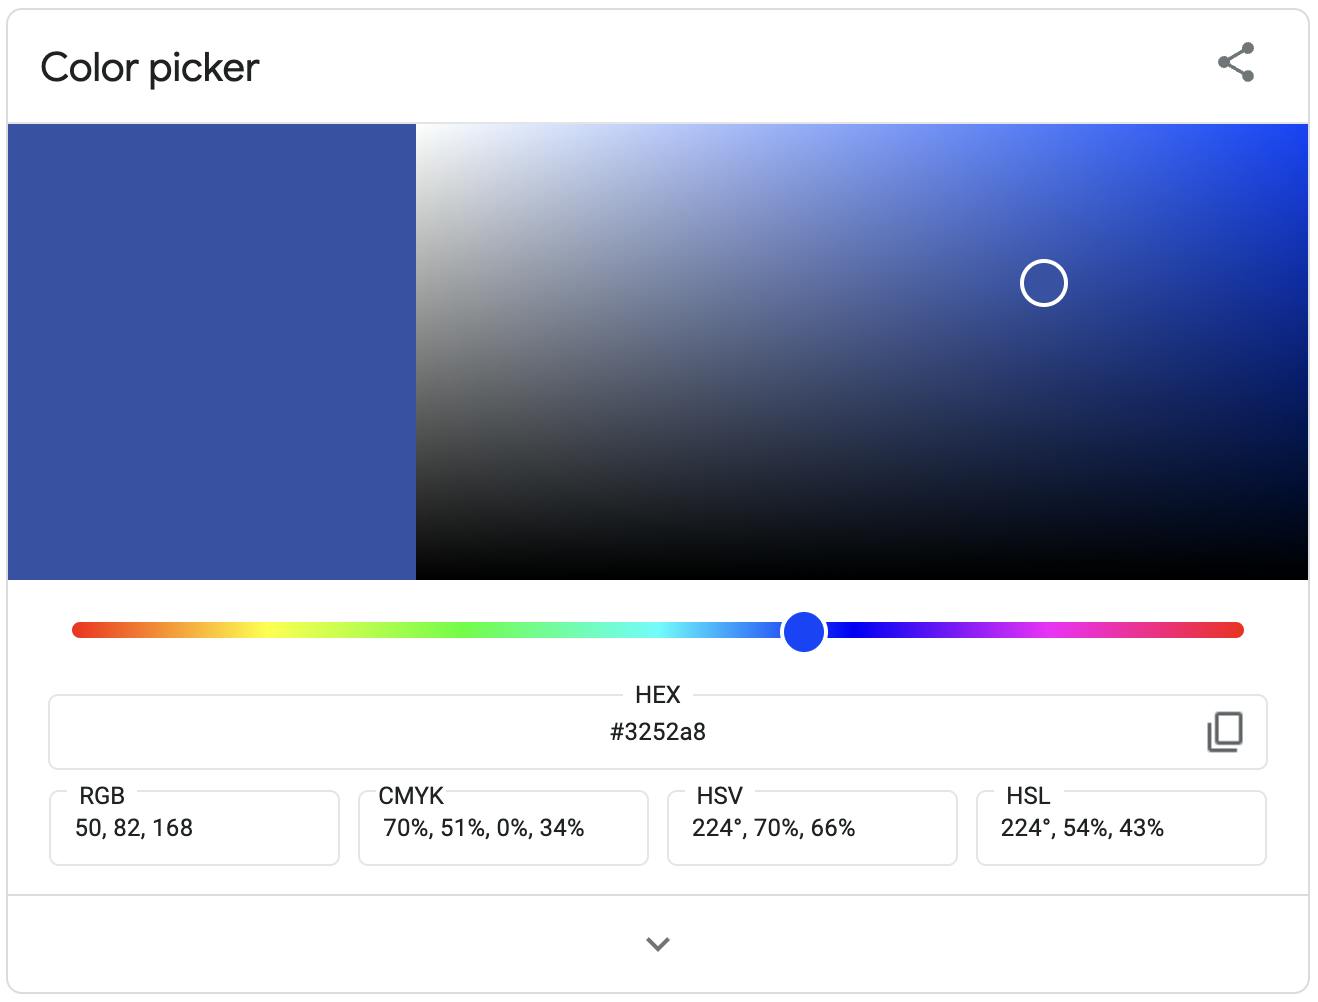 A color picker representing a color as an RGB value